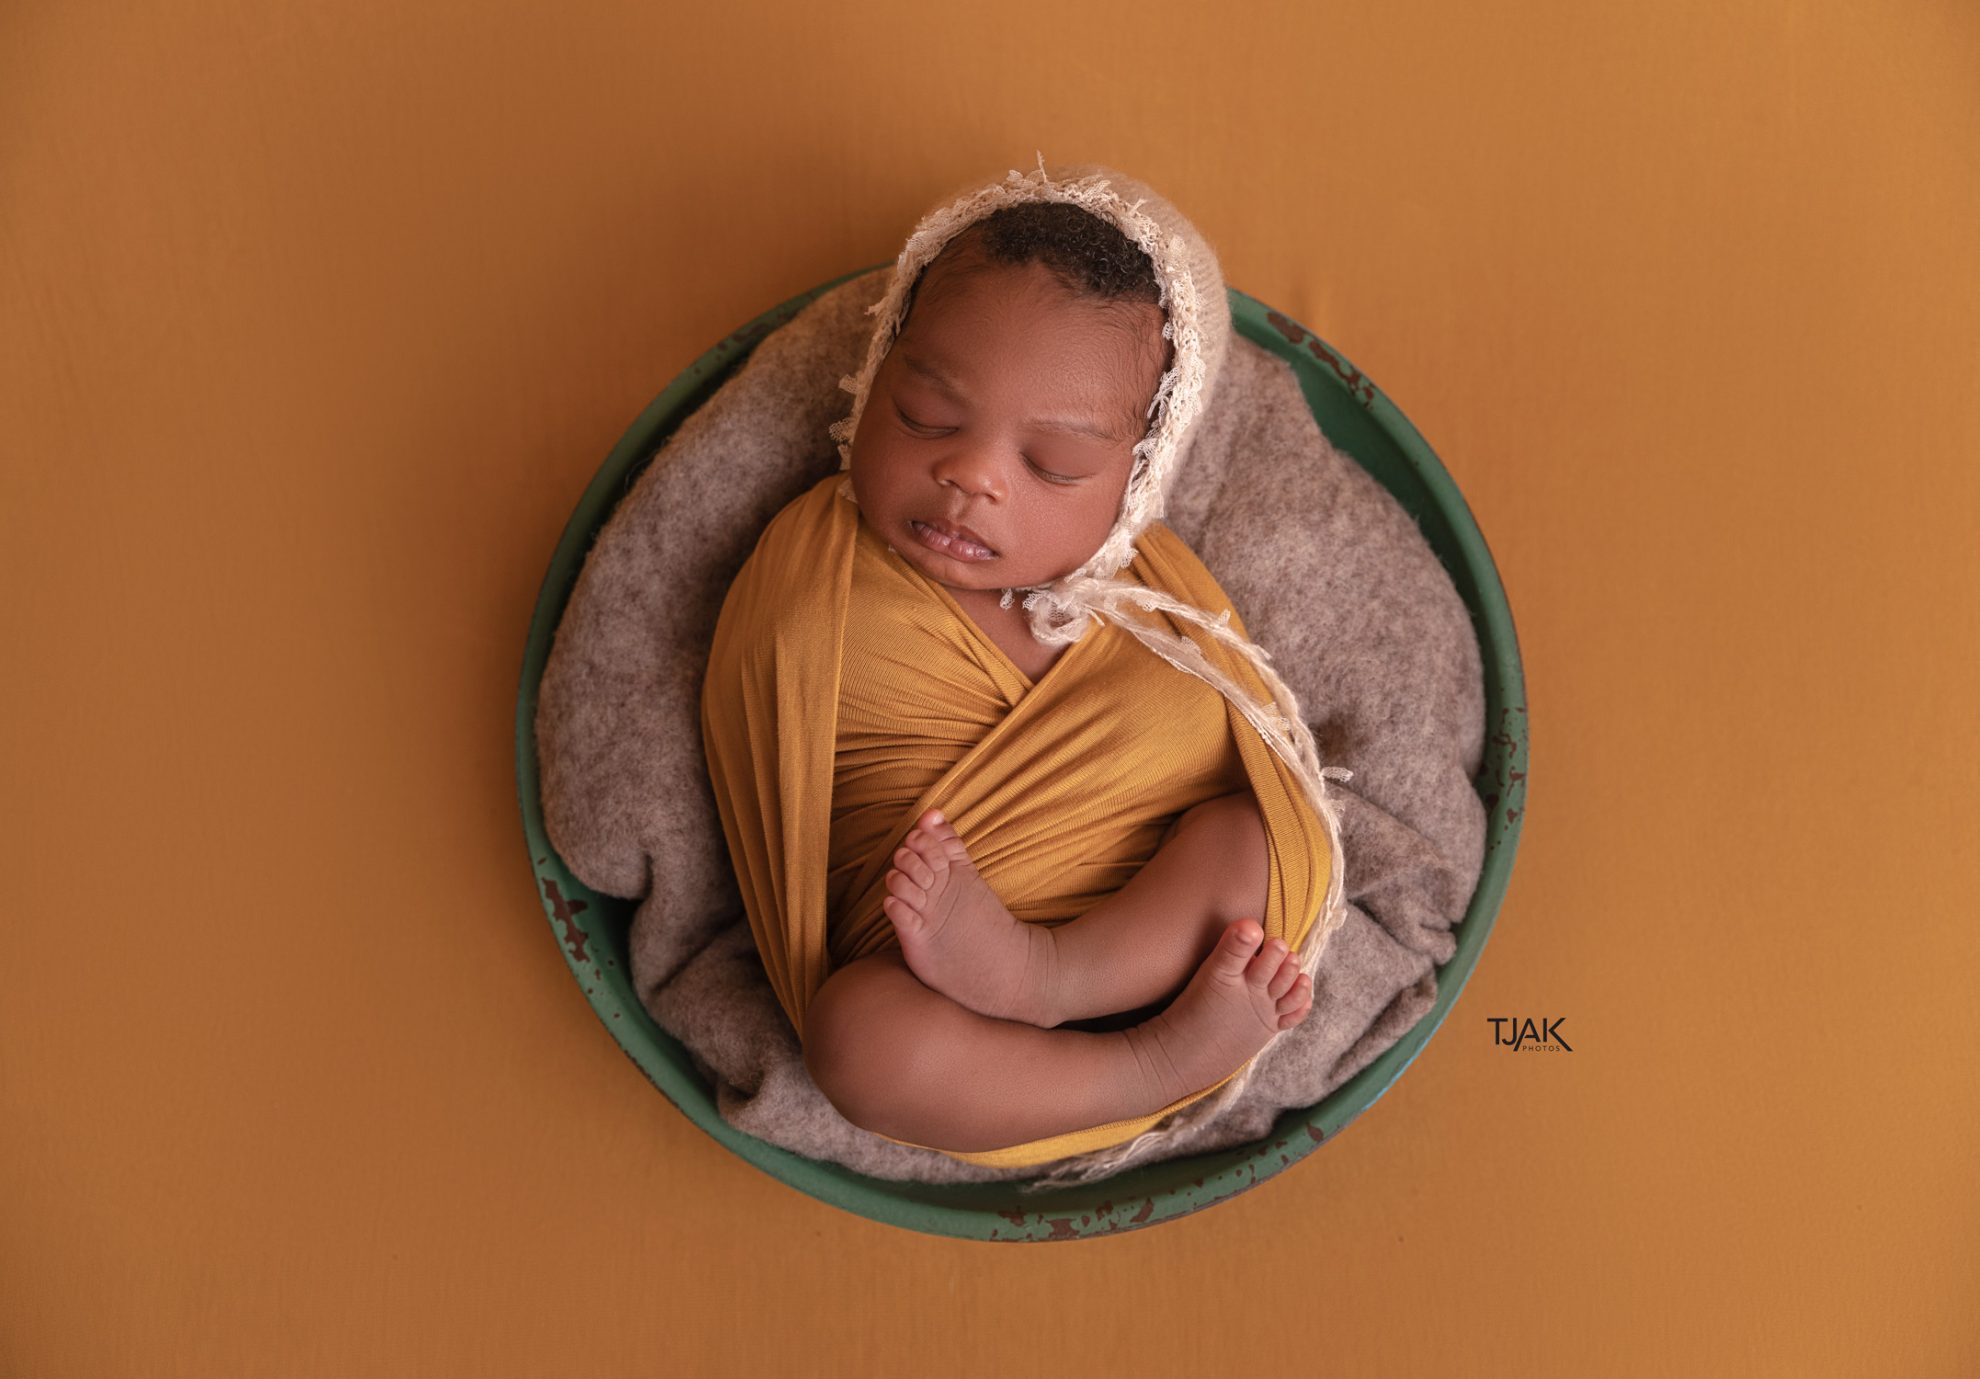 Baby photoshoot of a newborn wearing bonnet in a bowl by a maternity photographer